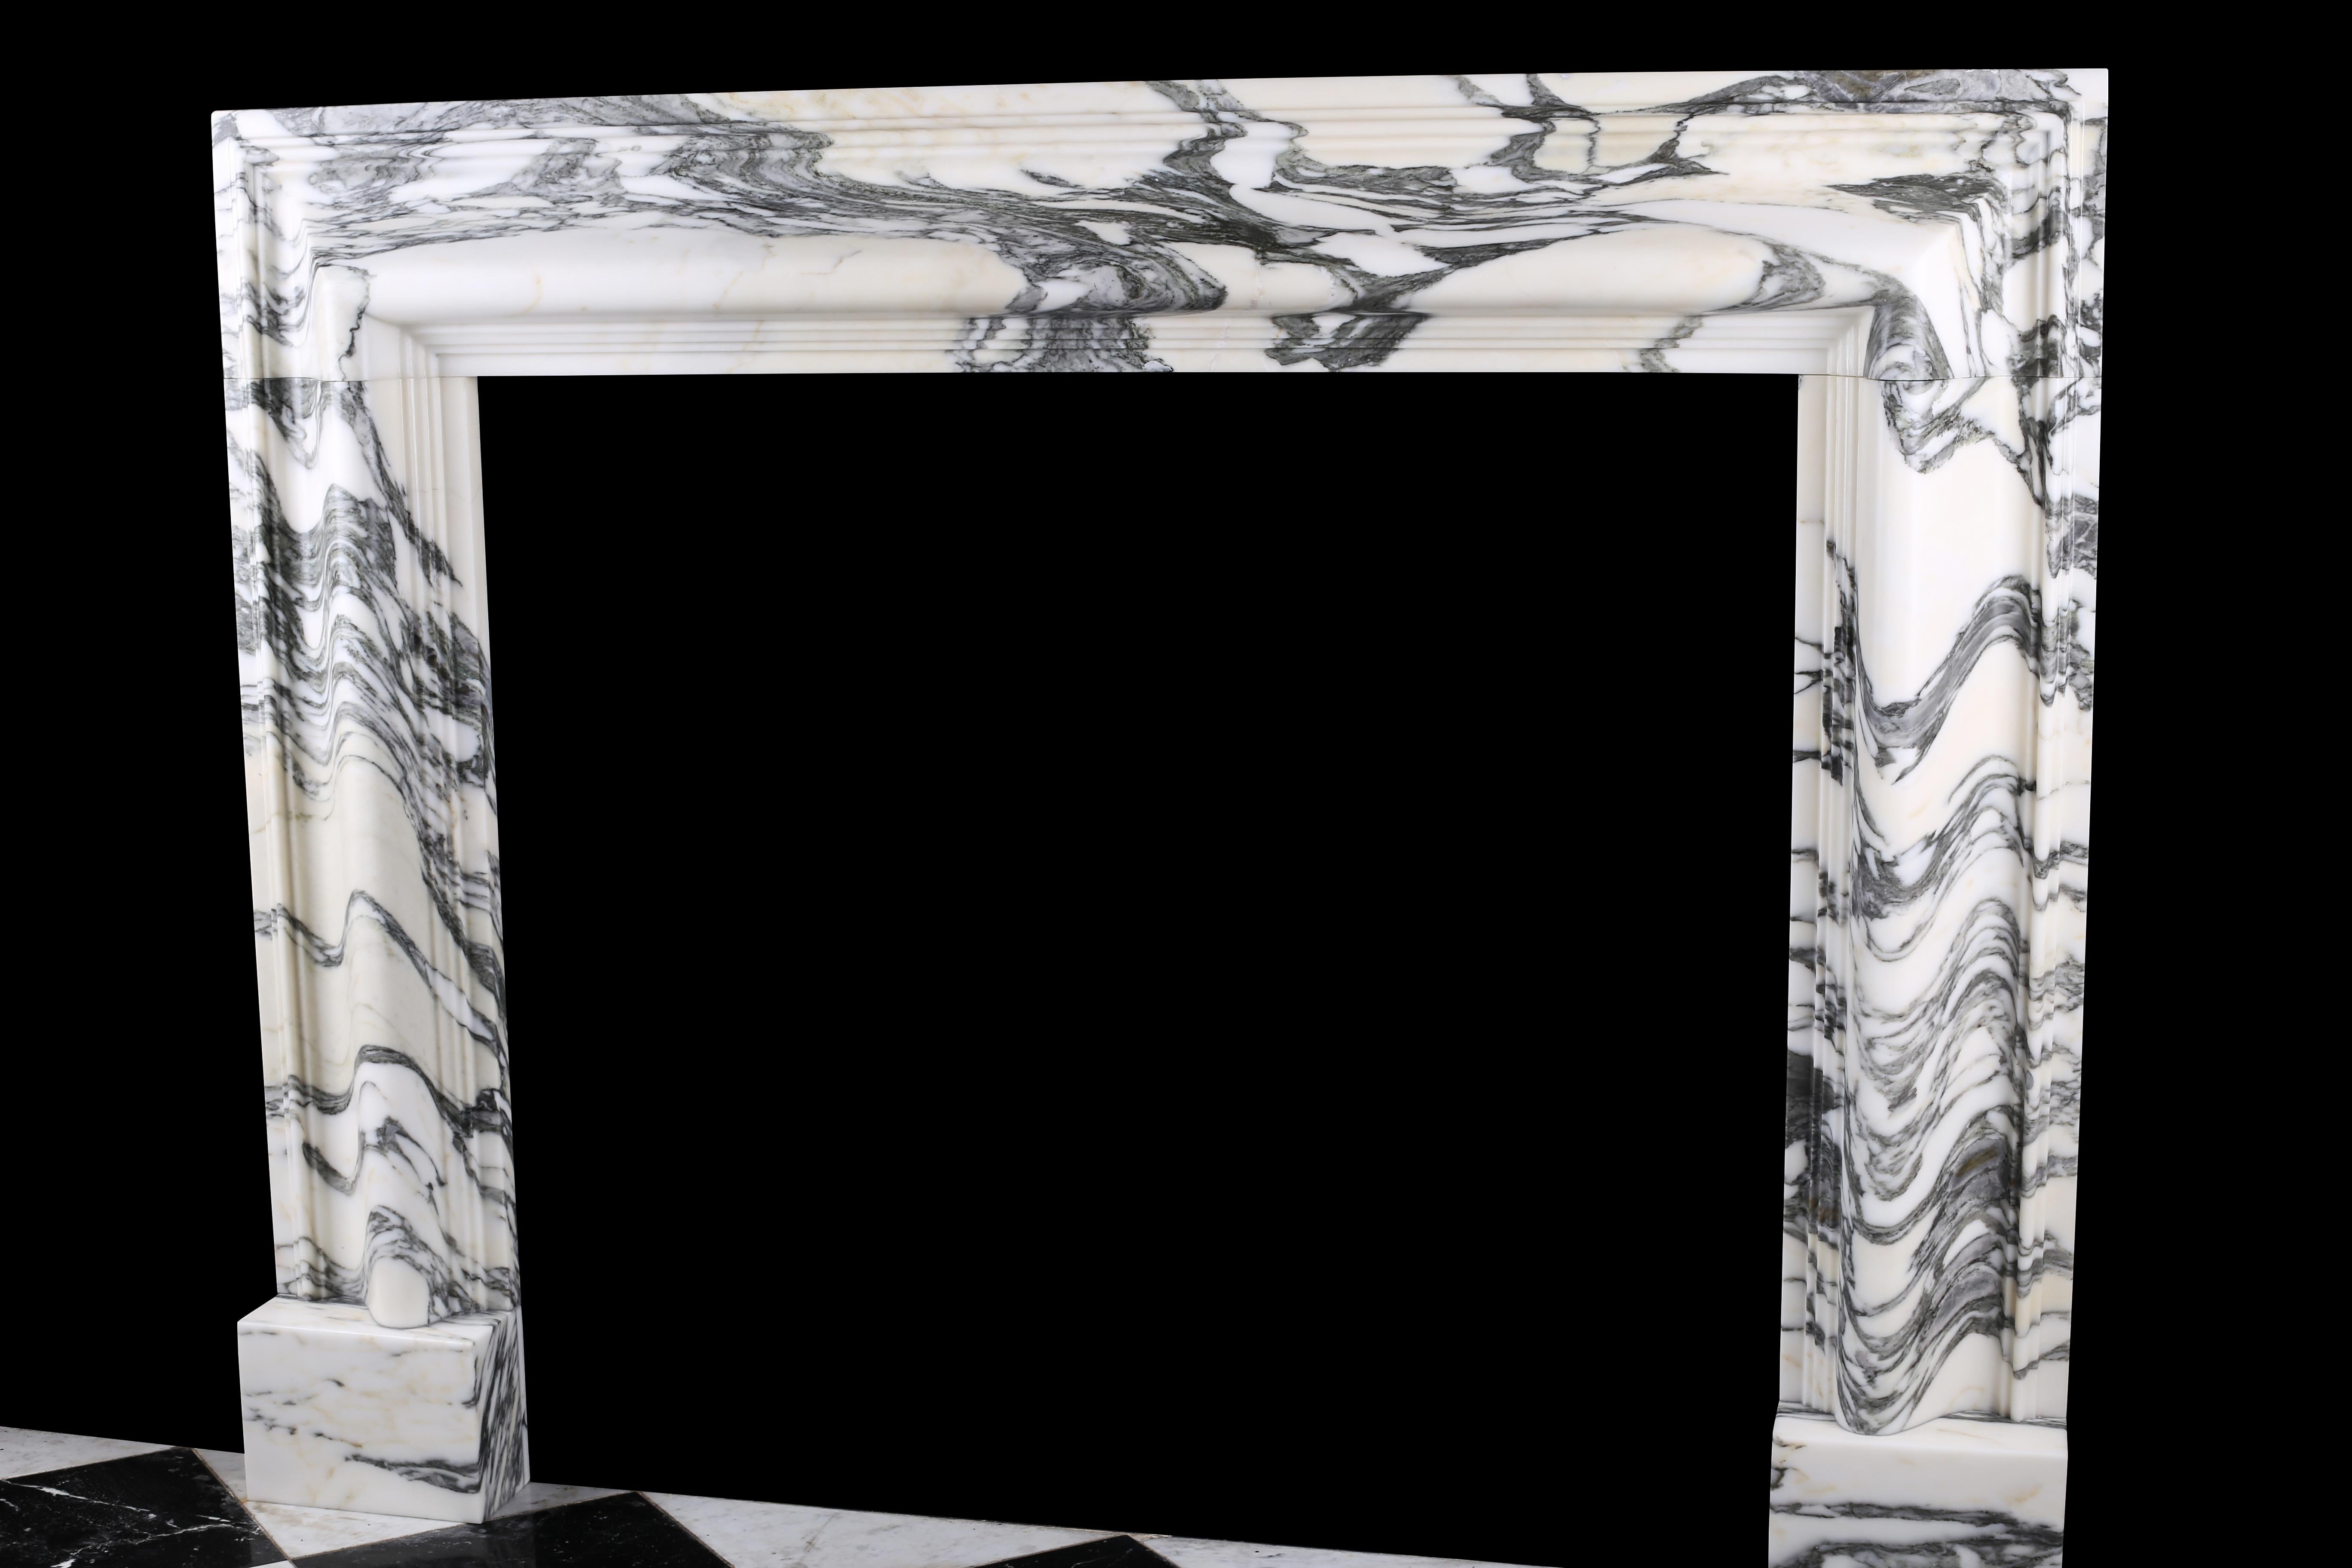 Beautiful Baroque Bolection fireplace in Italian Arabescato marble

A Baroque style Bolection fireplace surround of bold proportions with very finely carved columns with a rising ogee edging, which are supported on substantial footblocks, in high